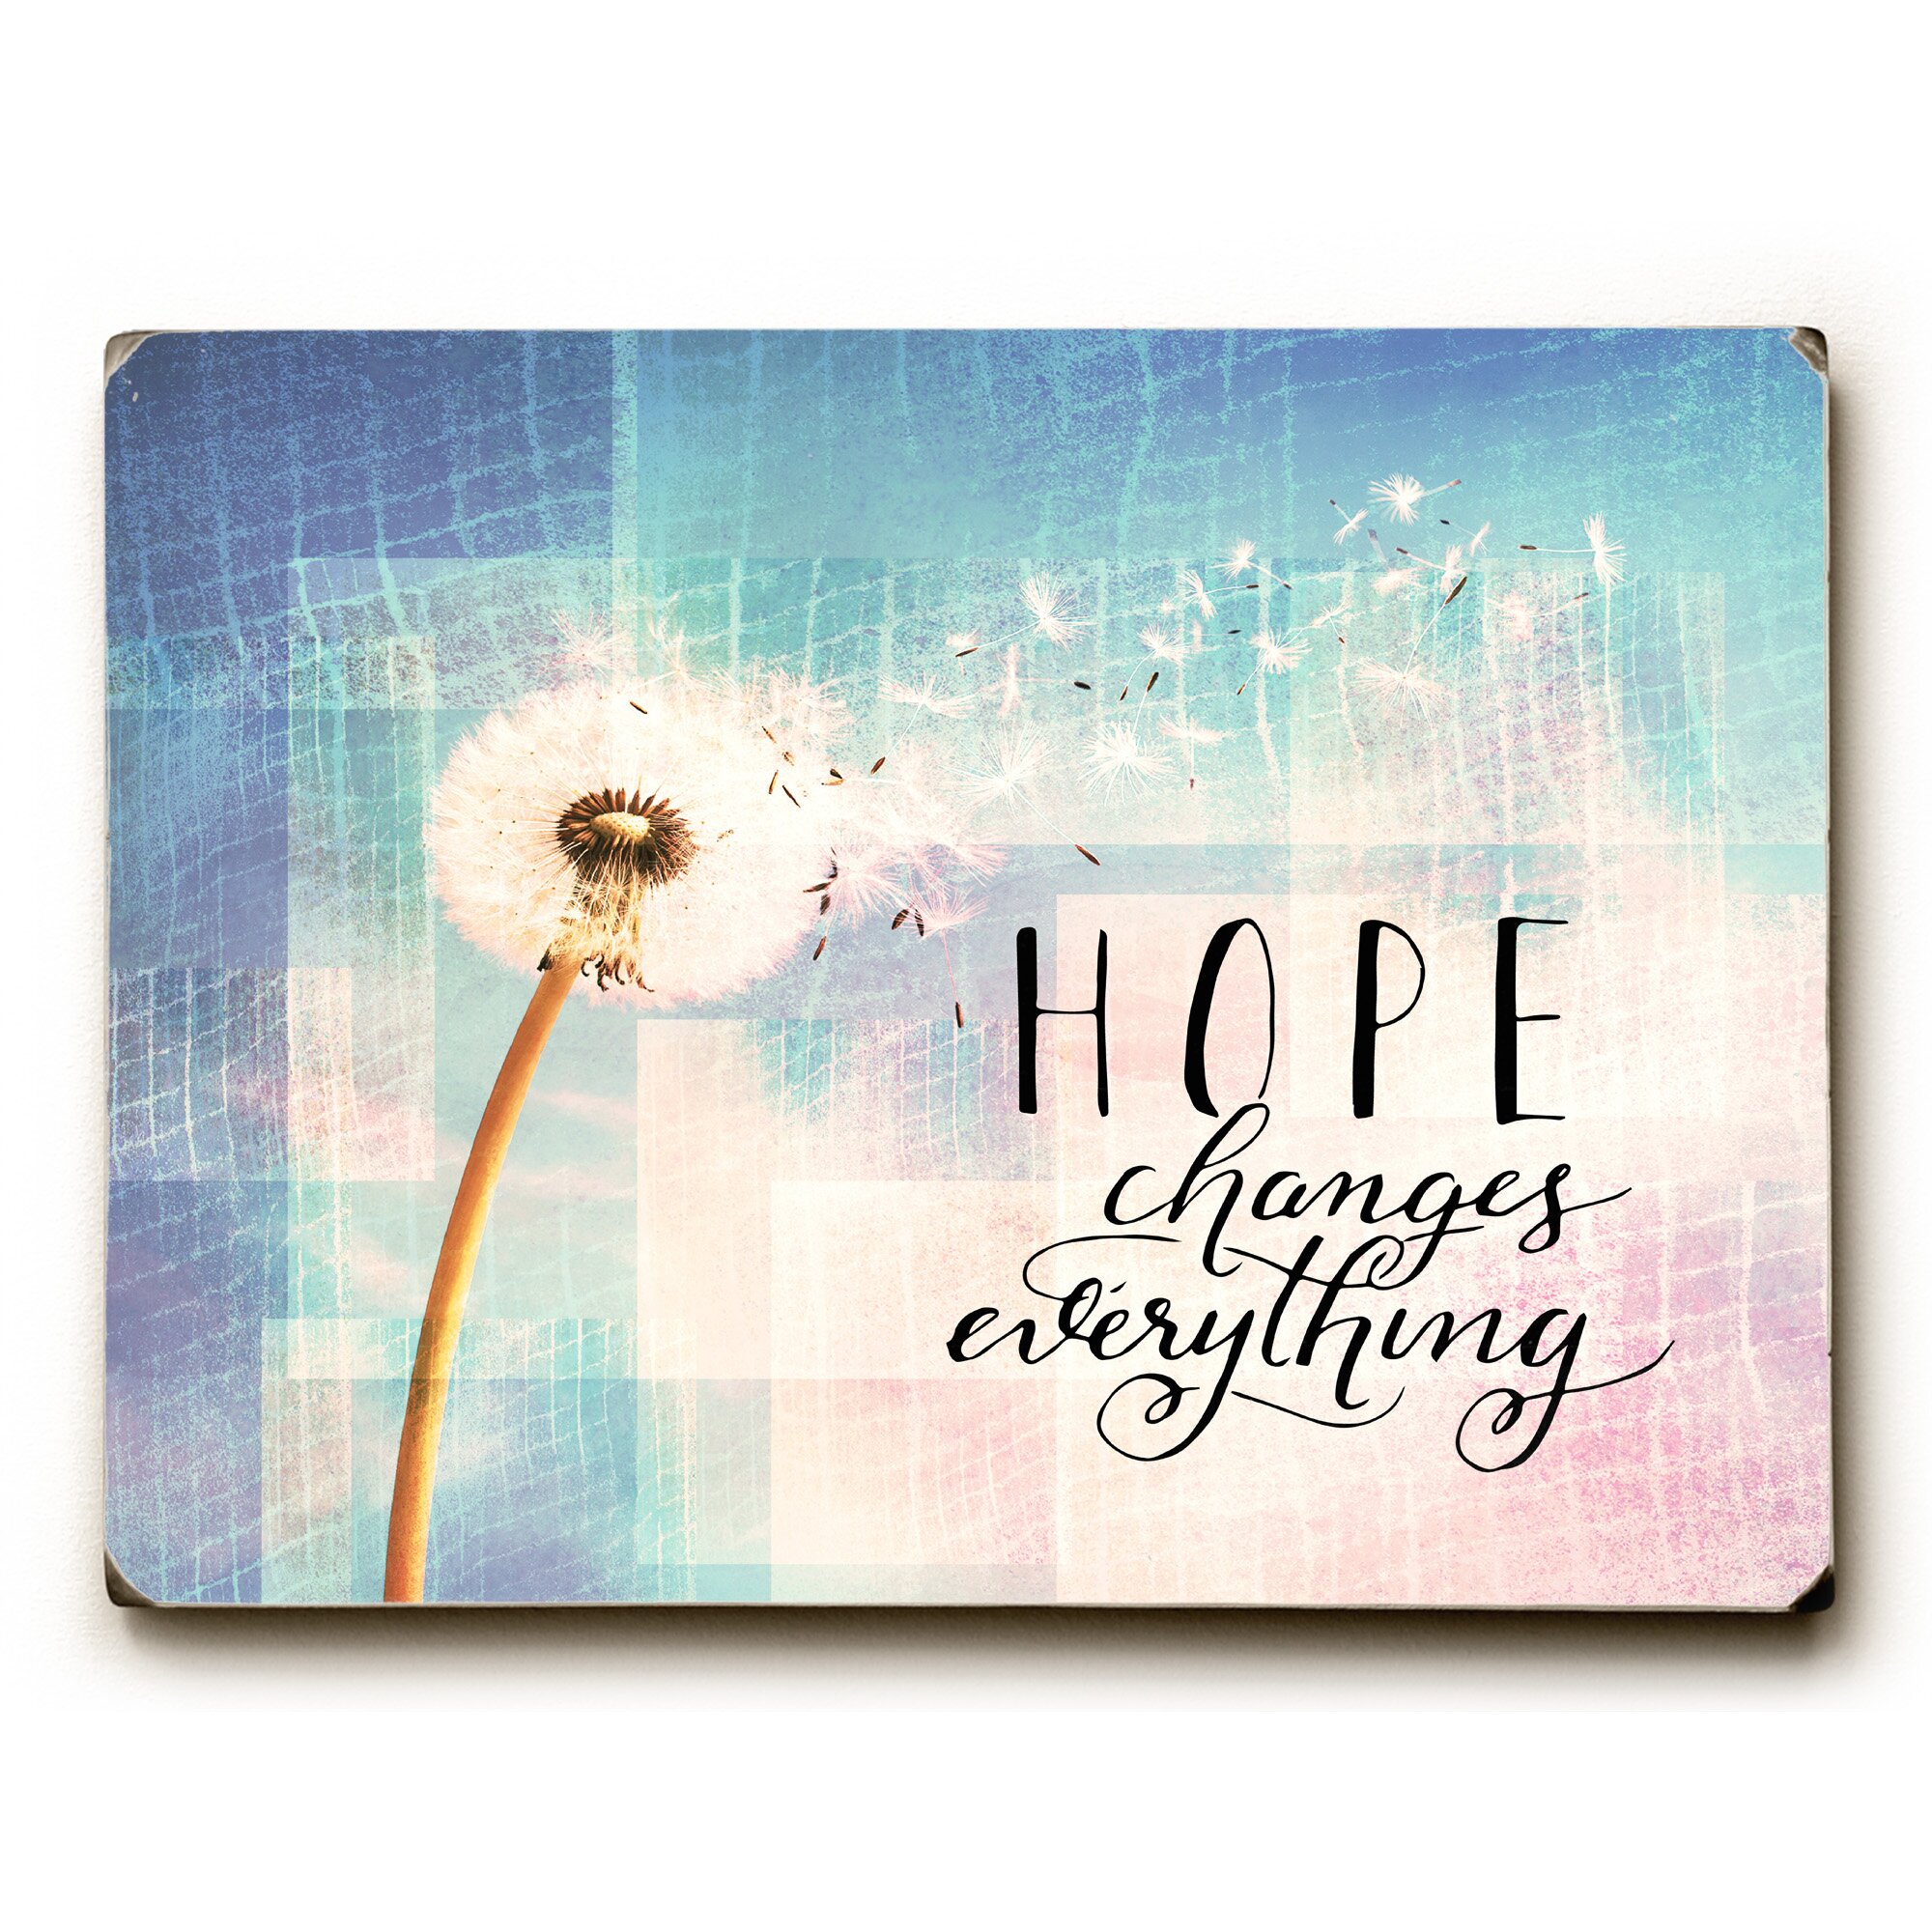 Ebern Designs 'Hope Changes Everything Dandelion' Rectangle Graphic Art